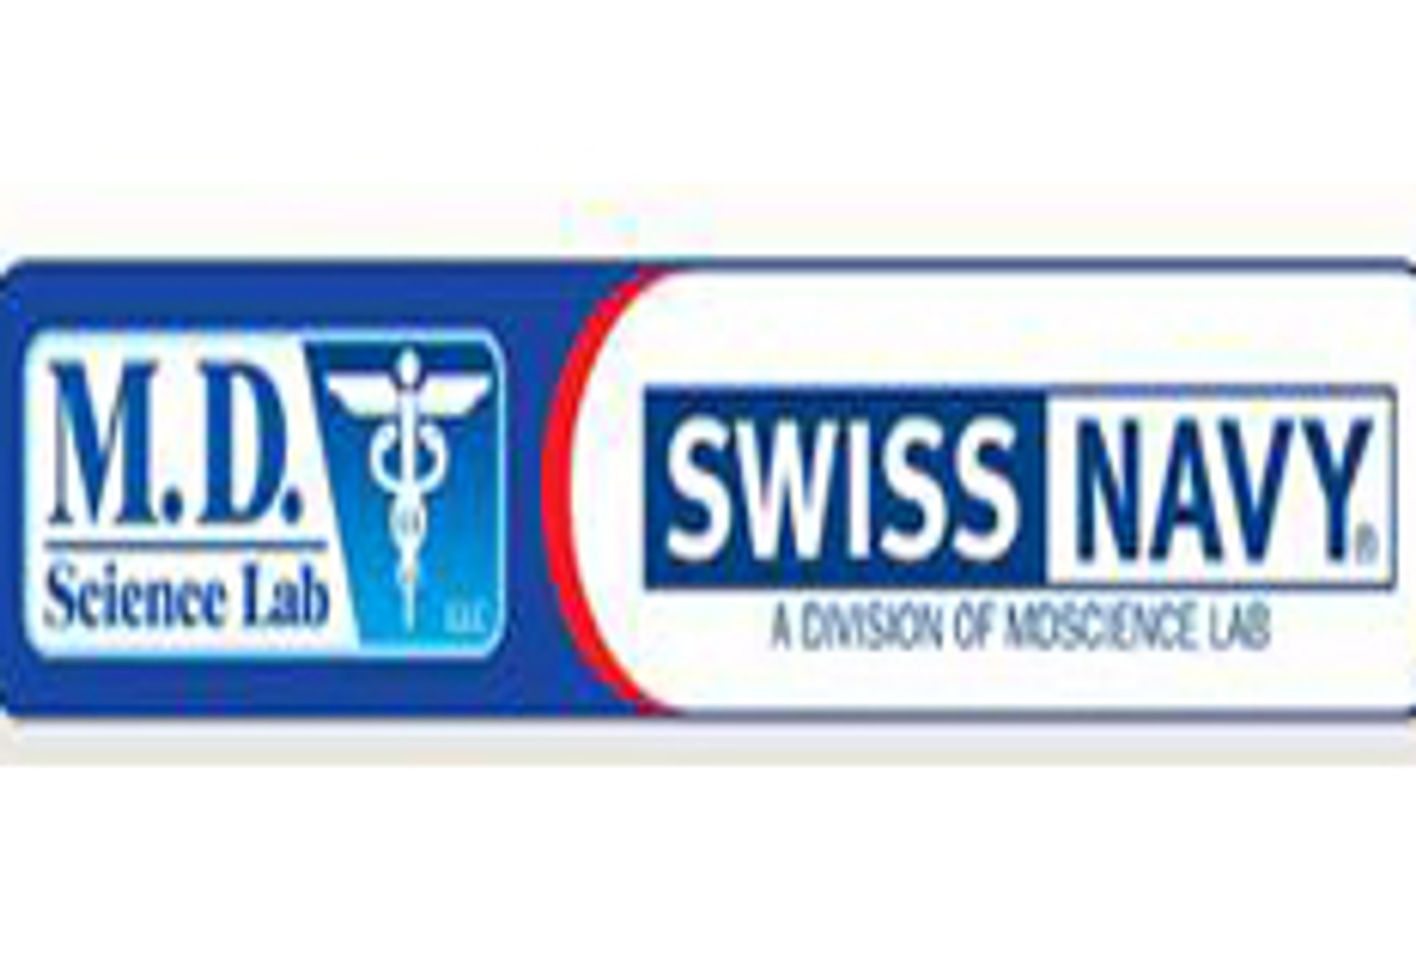 Swiss Navy Lube Now Available at Walgreens Alternative Lifestyle Stores